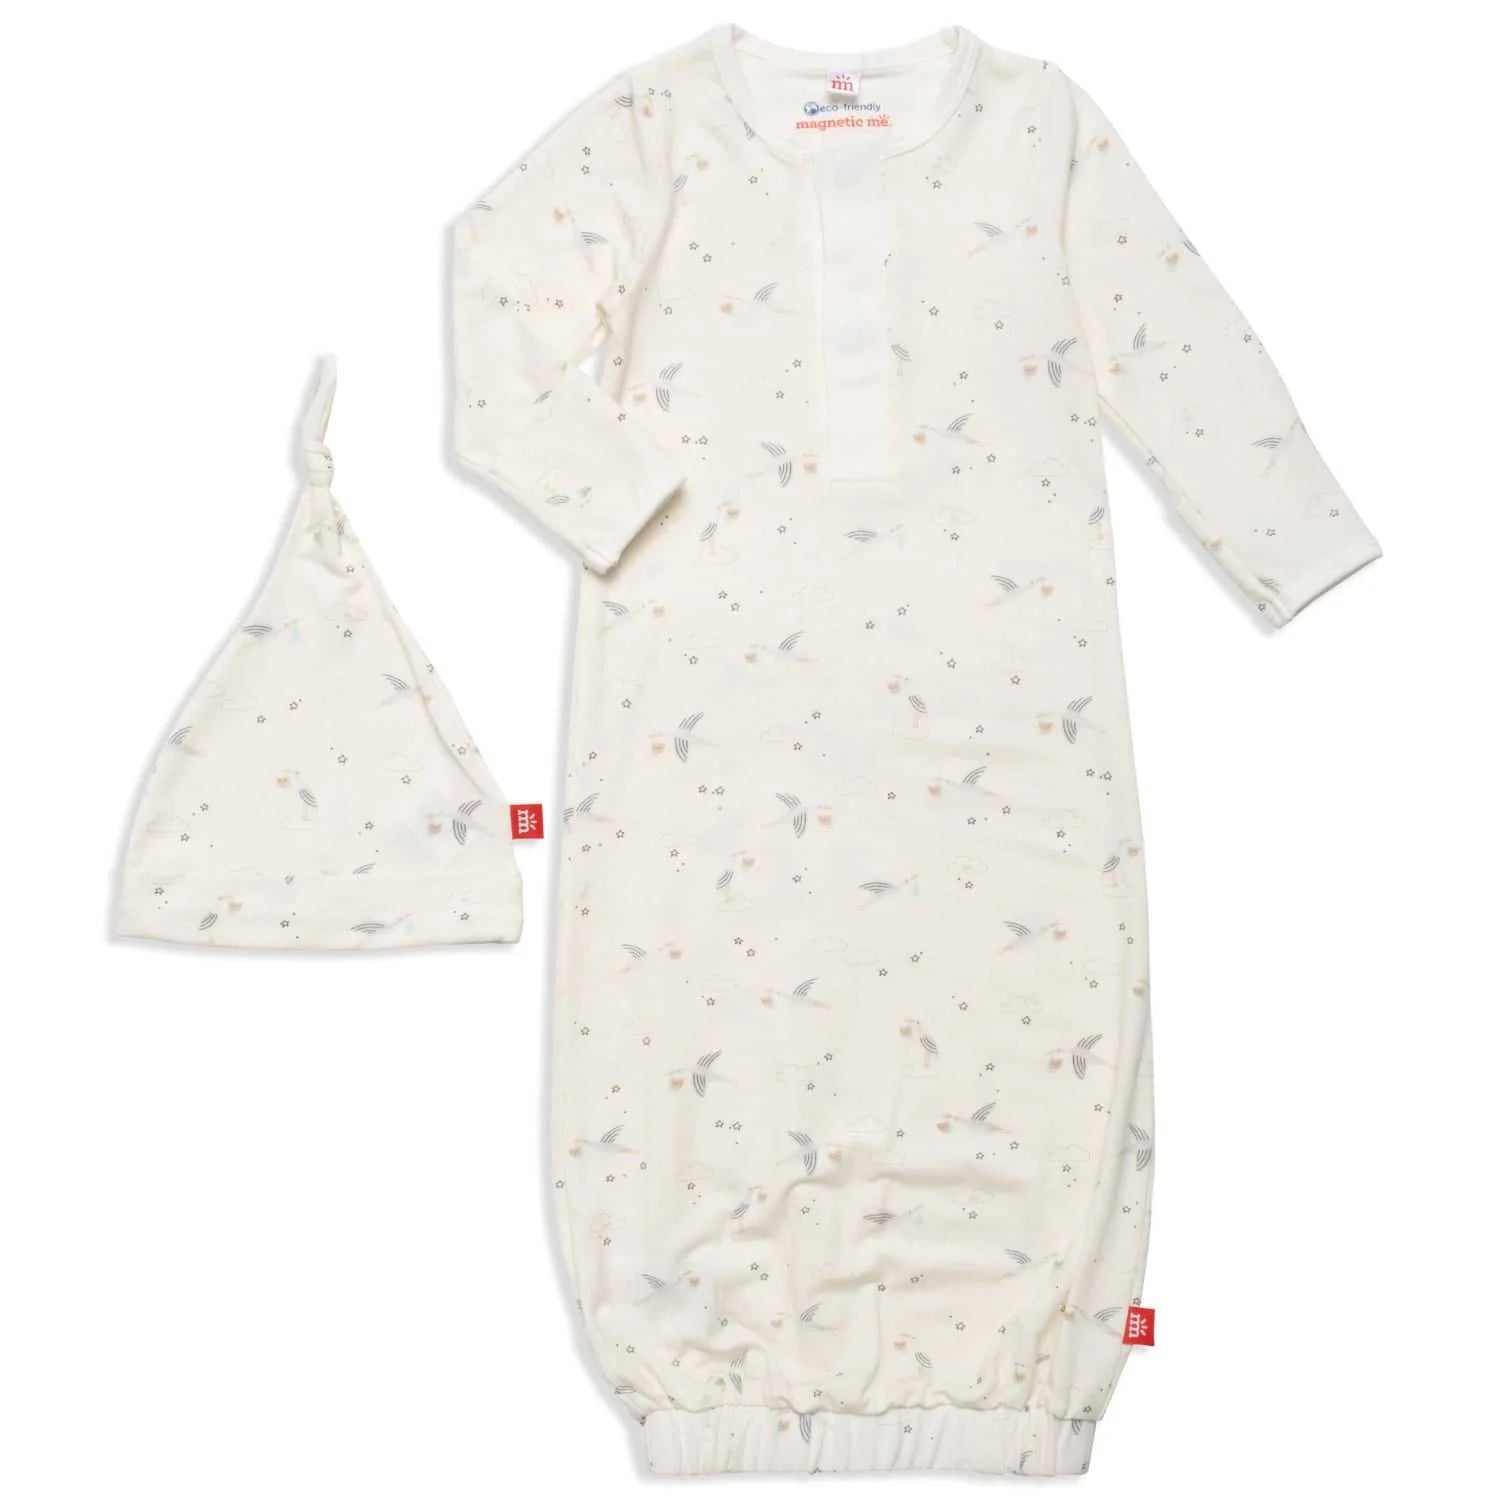 Magnetic Beary Special Delivery Gown & Hat NB-3m